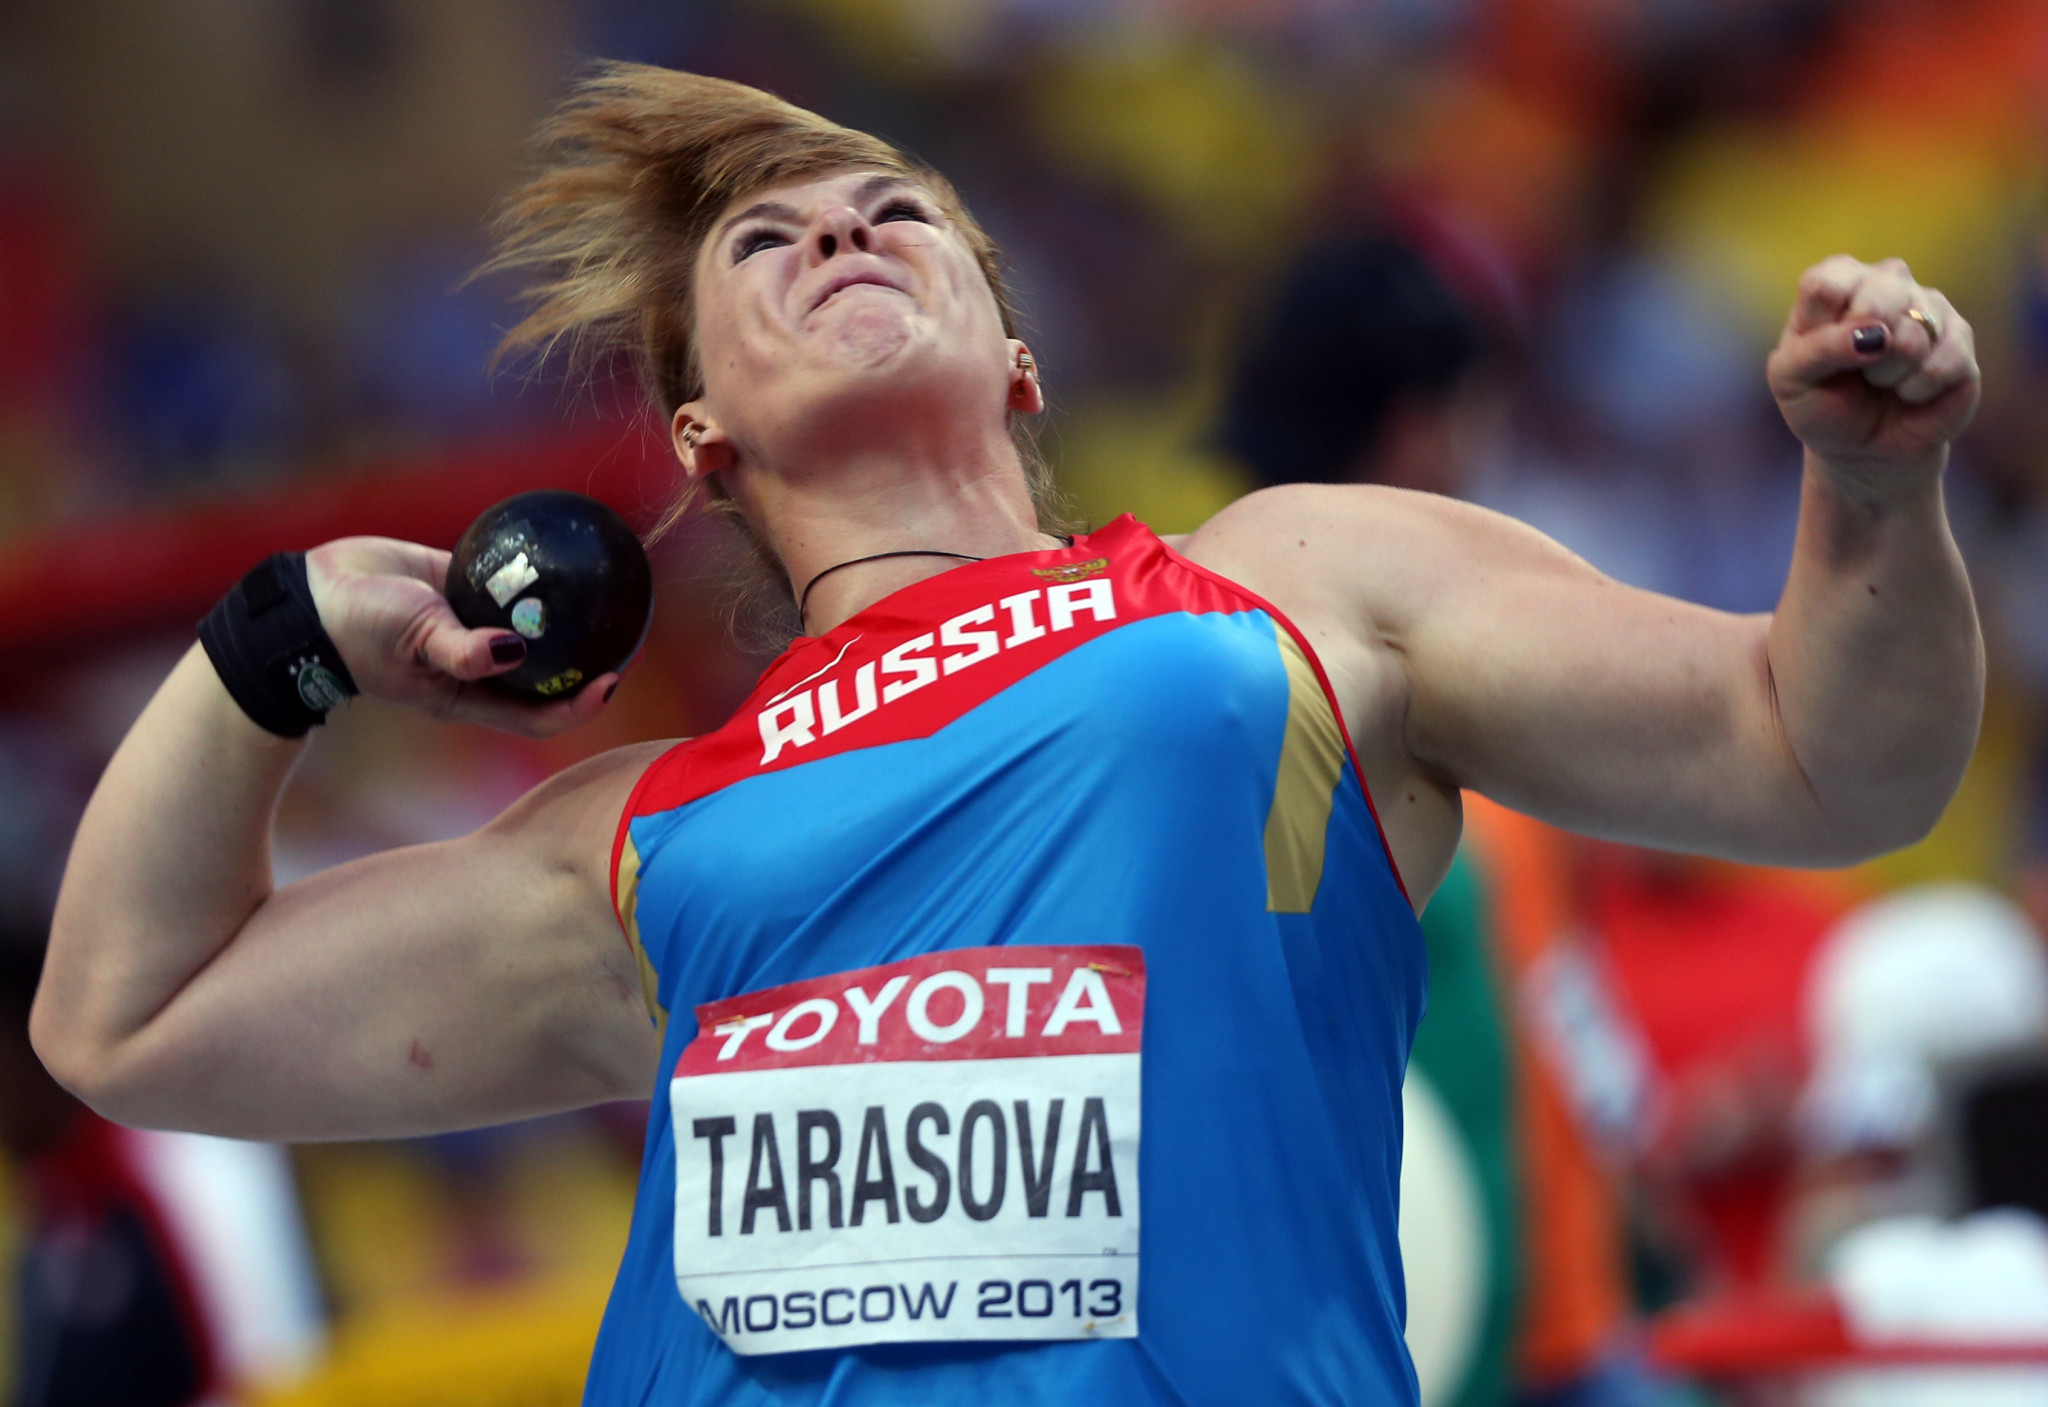 Tarasova's seventh-place finish at the World Athletics Championships in Moscow in 2013 has also been disqualified ©Getty Images